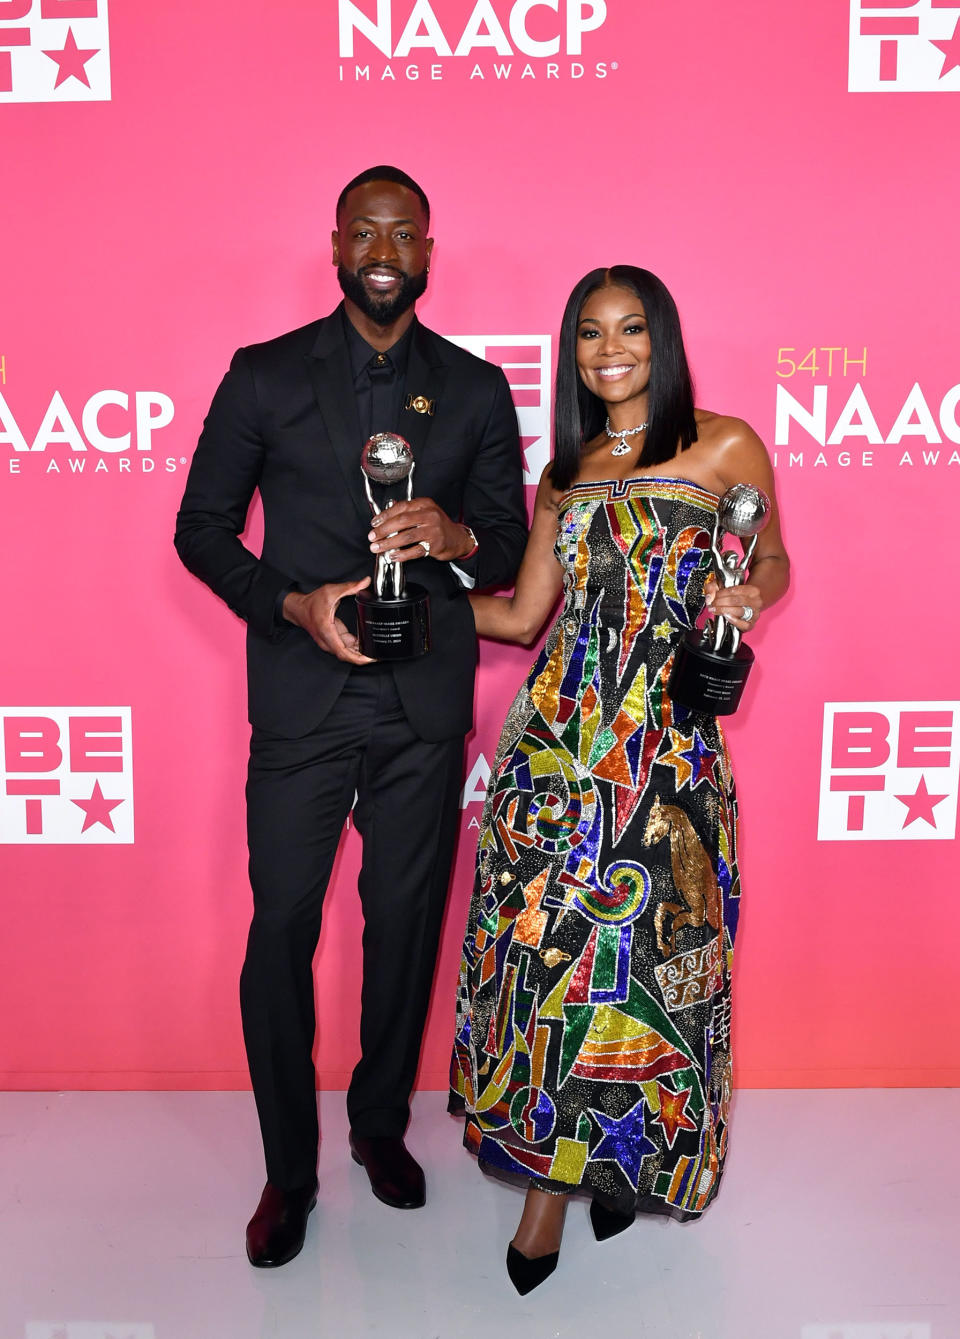 Honorees Dwyane Wade and Gabrielle Union, recipients of the President's Award, pose in the press room during the 54th NAACP Image Awards at Pasadena Civic Auditorium on February 25, 2023 in Pasadena, California. (Aaron J. Thornton / Getty Images)